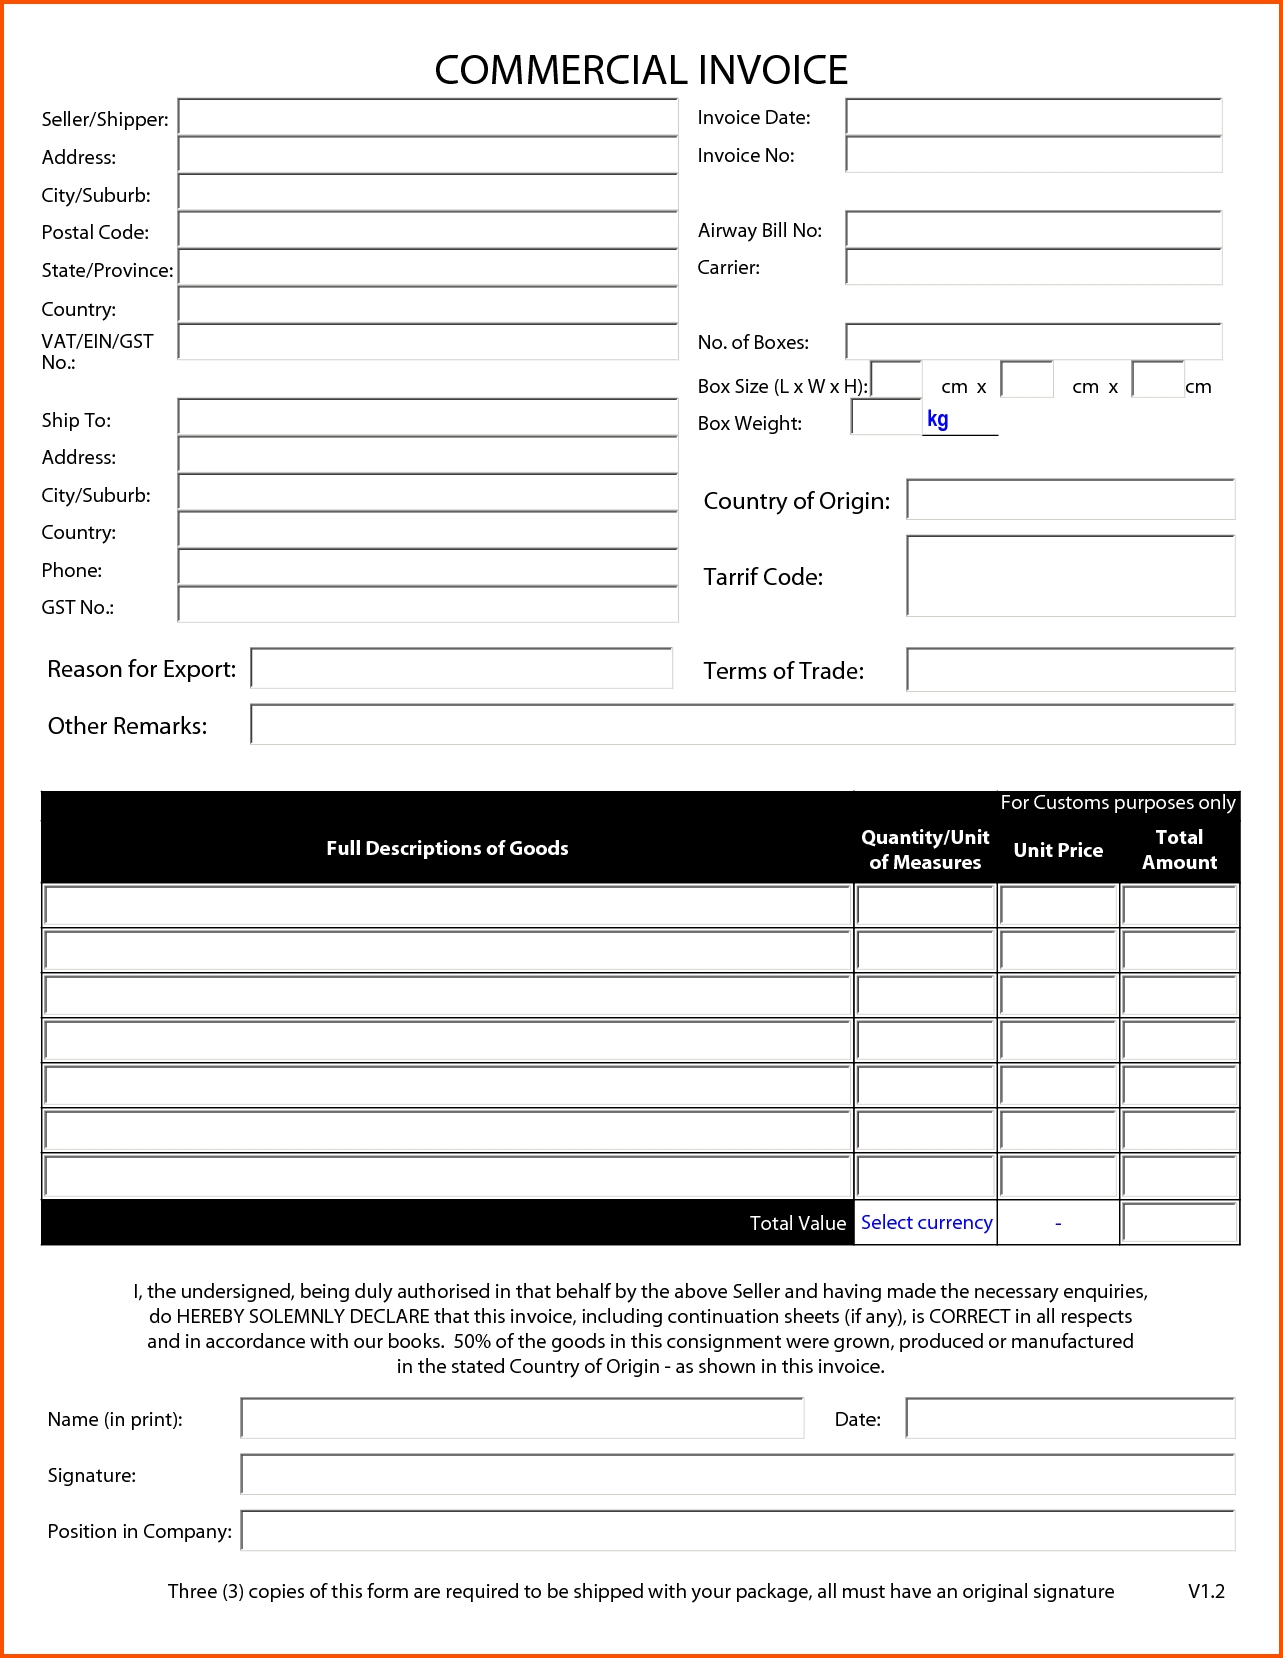 11 blank commercial invoice survey template words commercial invoice pdf fillable